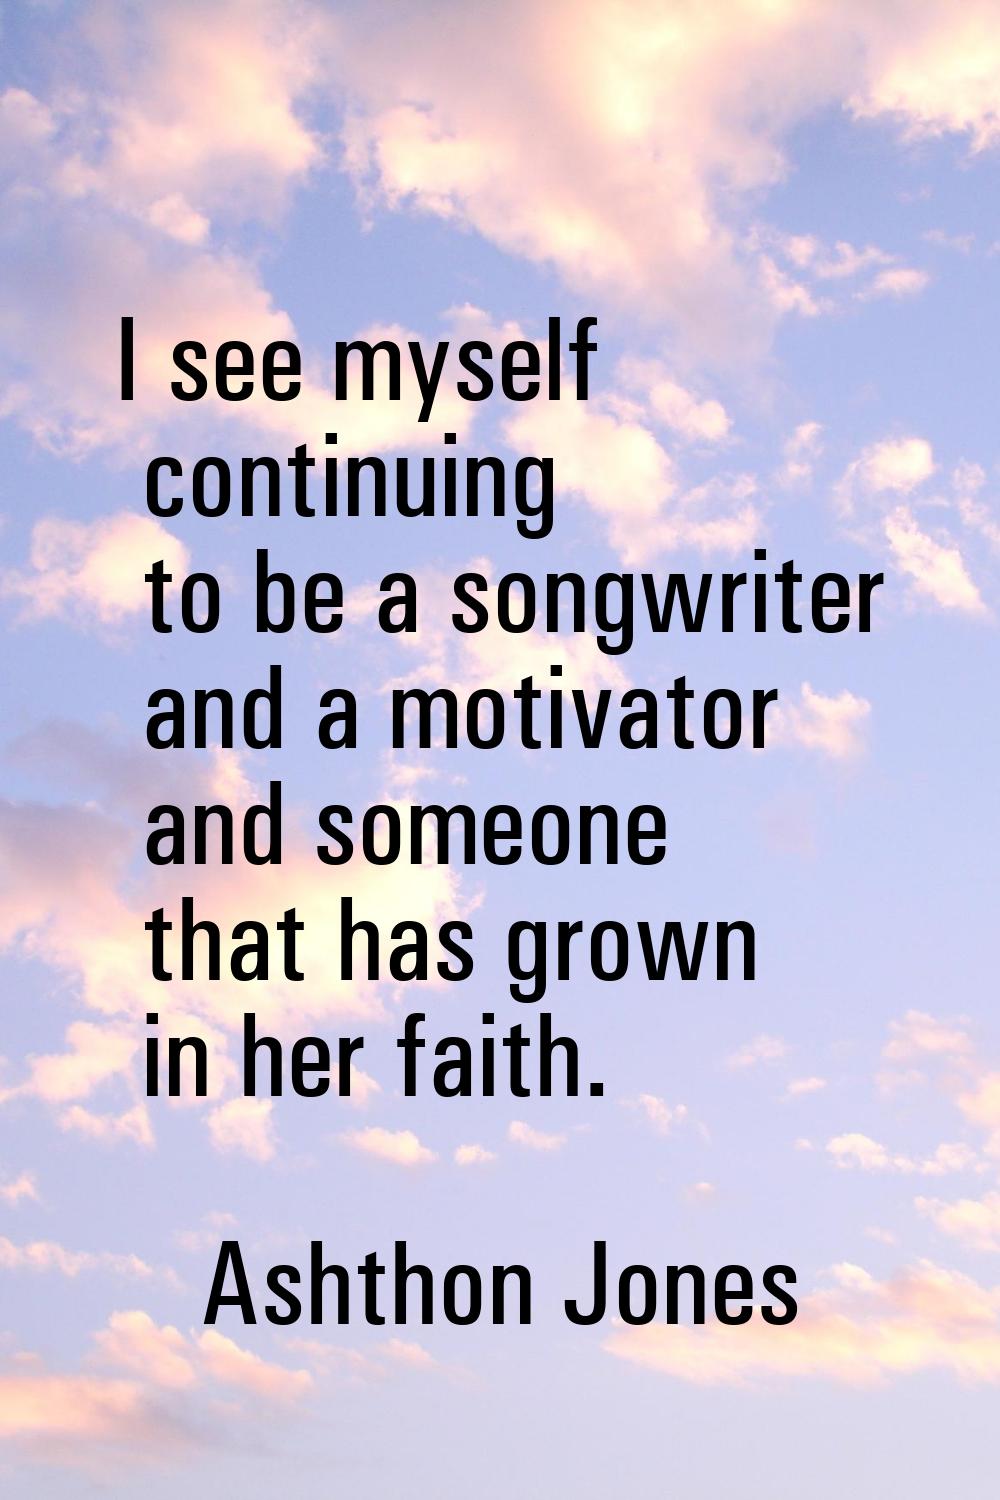 I see myself continuing to be a songwriter and a motivator and someone that has grown in her faith.